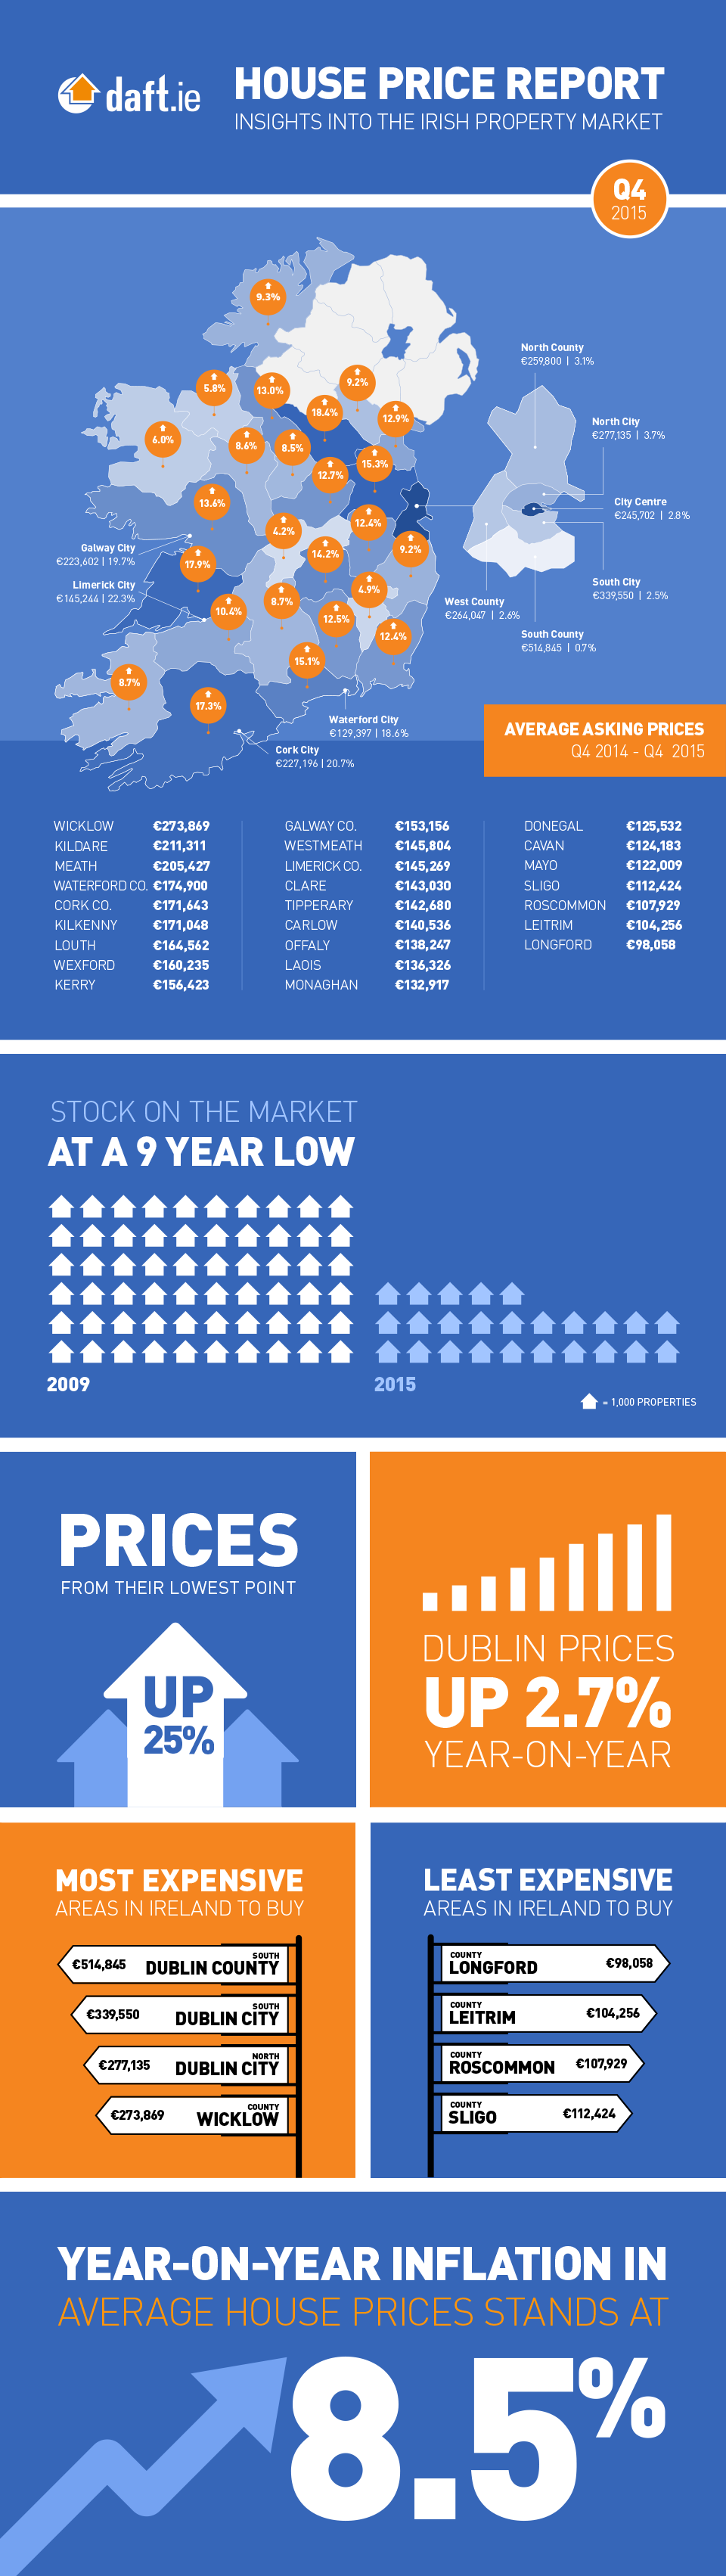 Daft.ie House Price Report: Q4 2015 Infographic